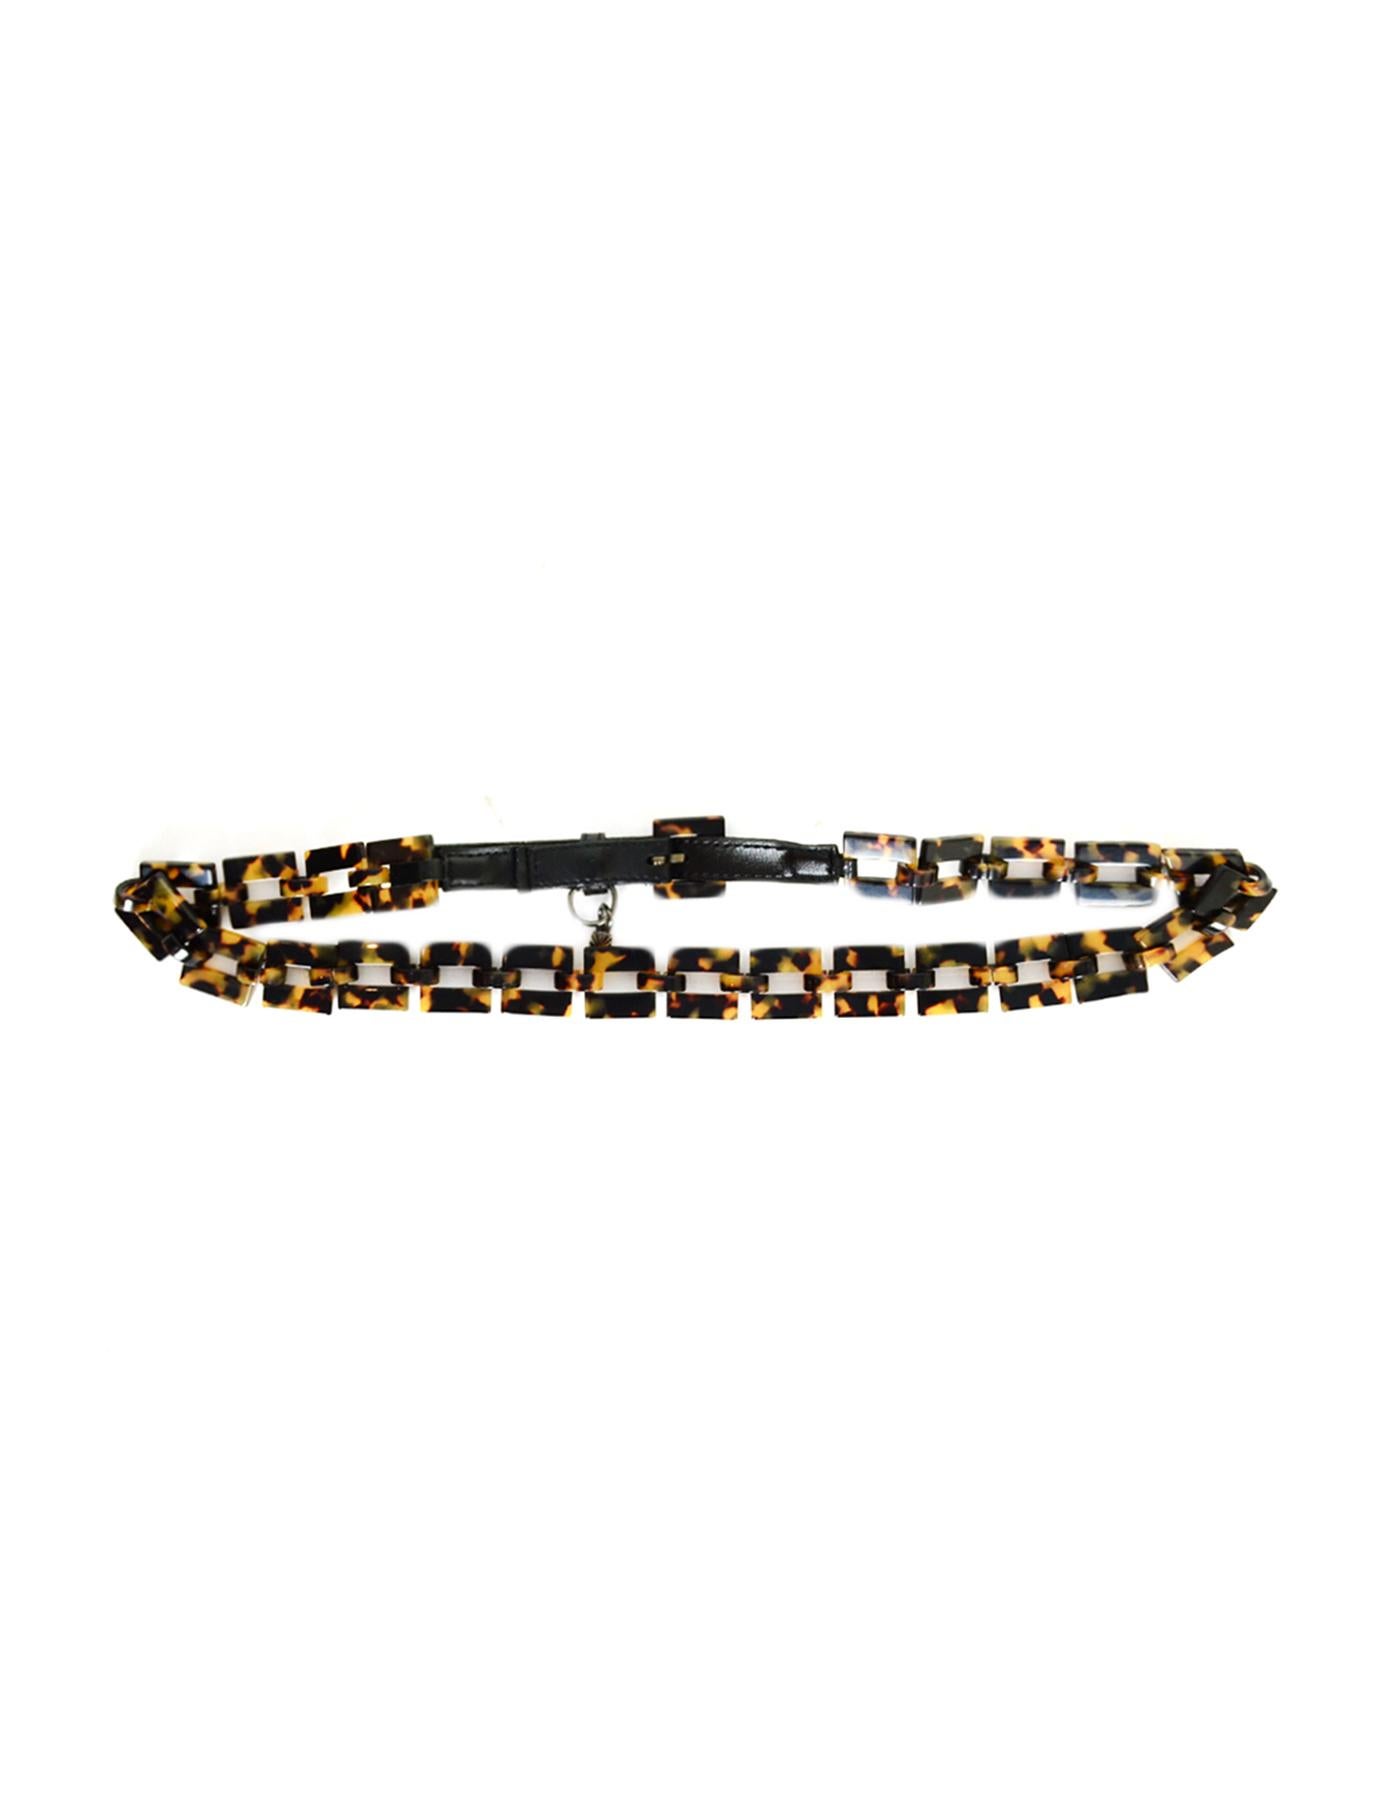 Yves Saint Laurent YSL Faux Tortoiseshell & Leather Belt.  Features YSL small charm hanging from belt loop.

Made In: France
Color: Brown/beige/tan & black
Hardware: Darkened silvertone
Materials: Resin (faux tortoiseshell) and